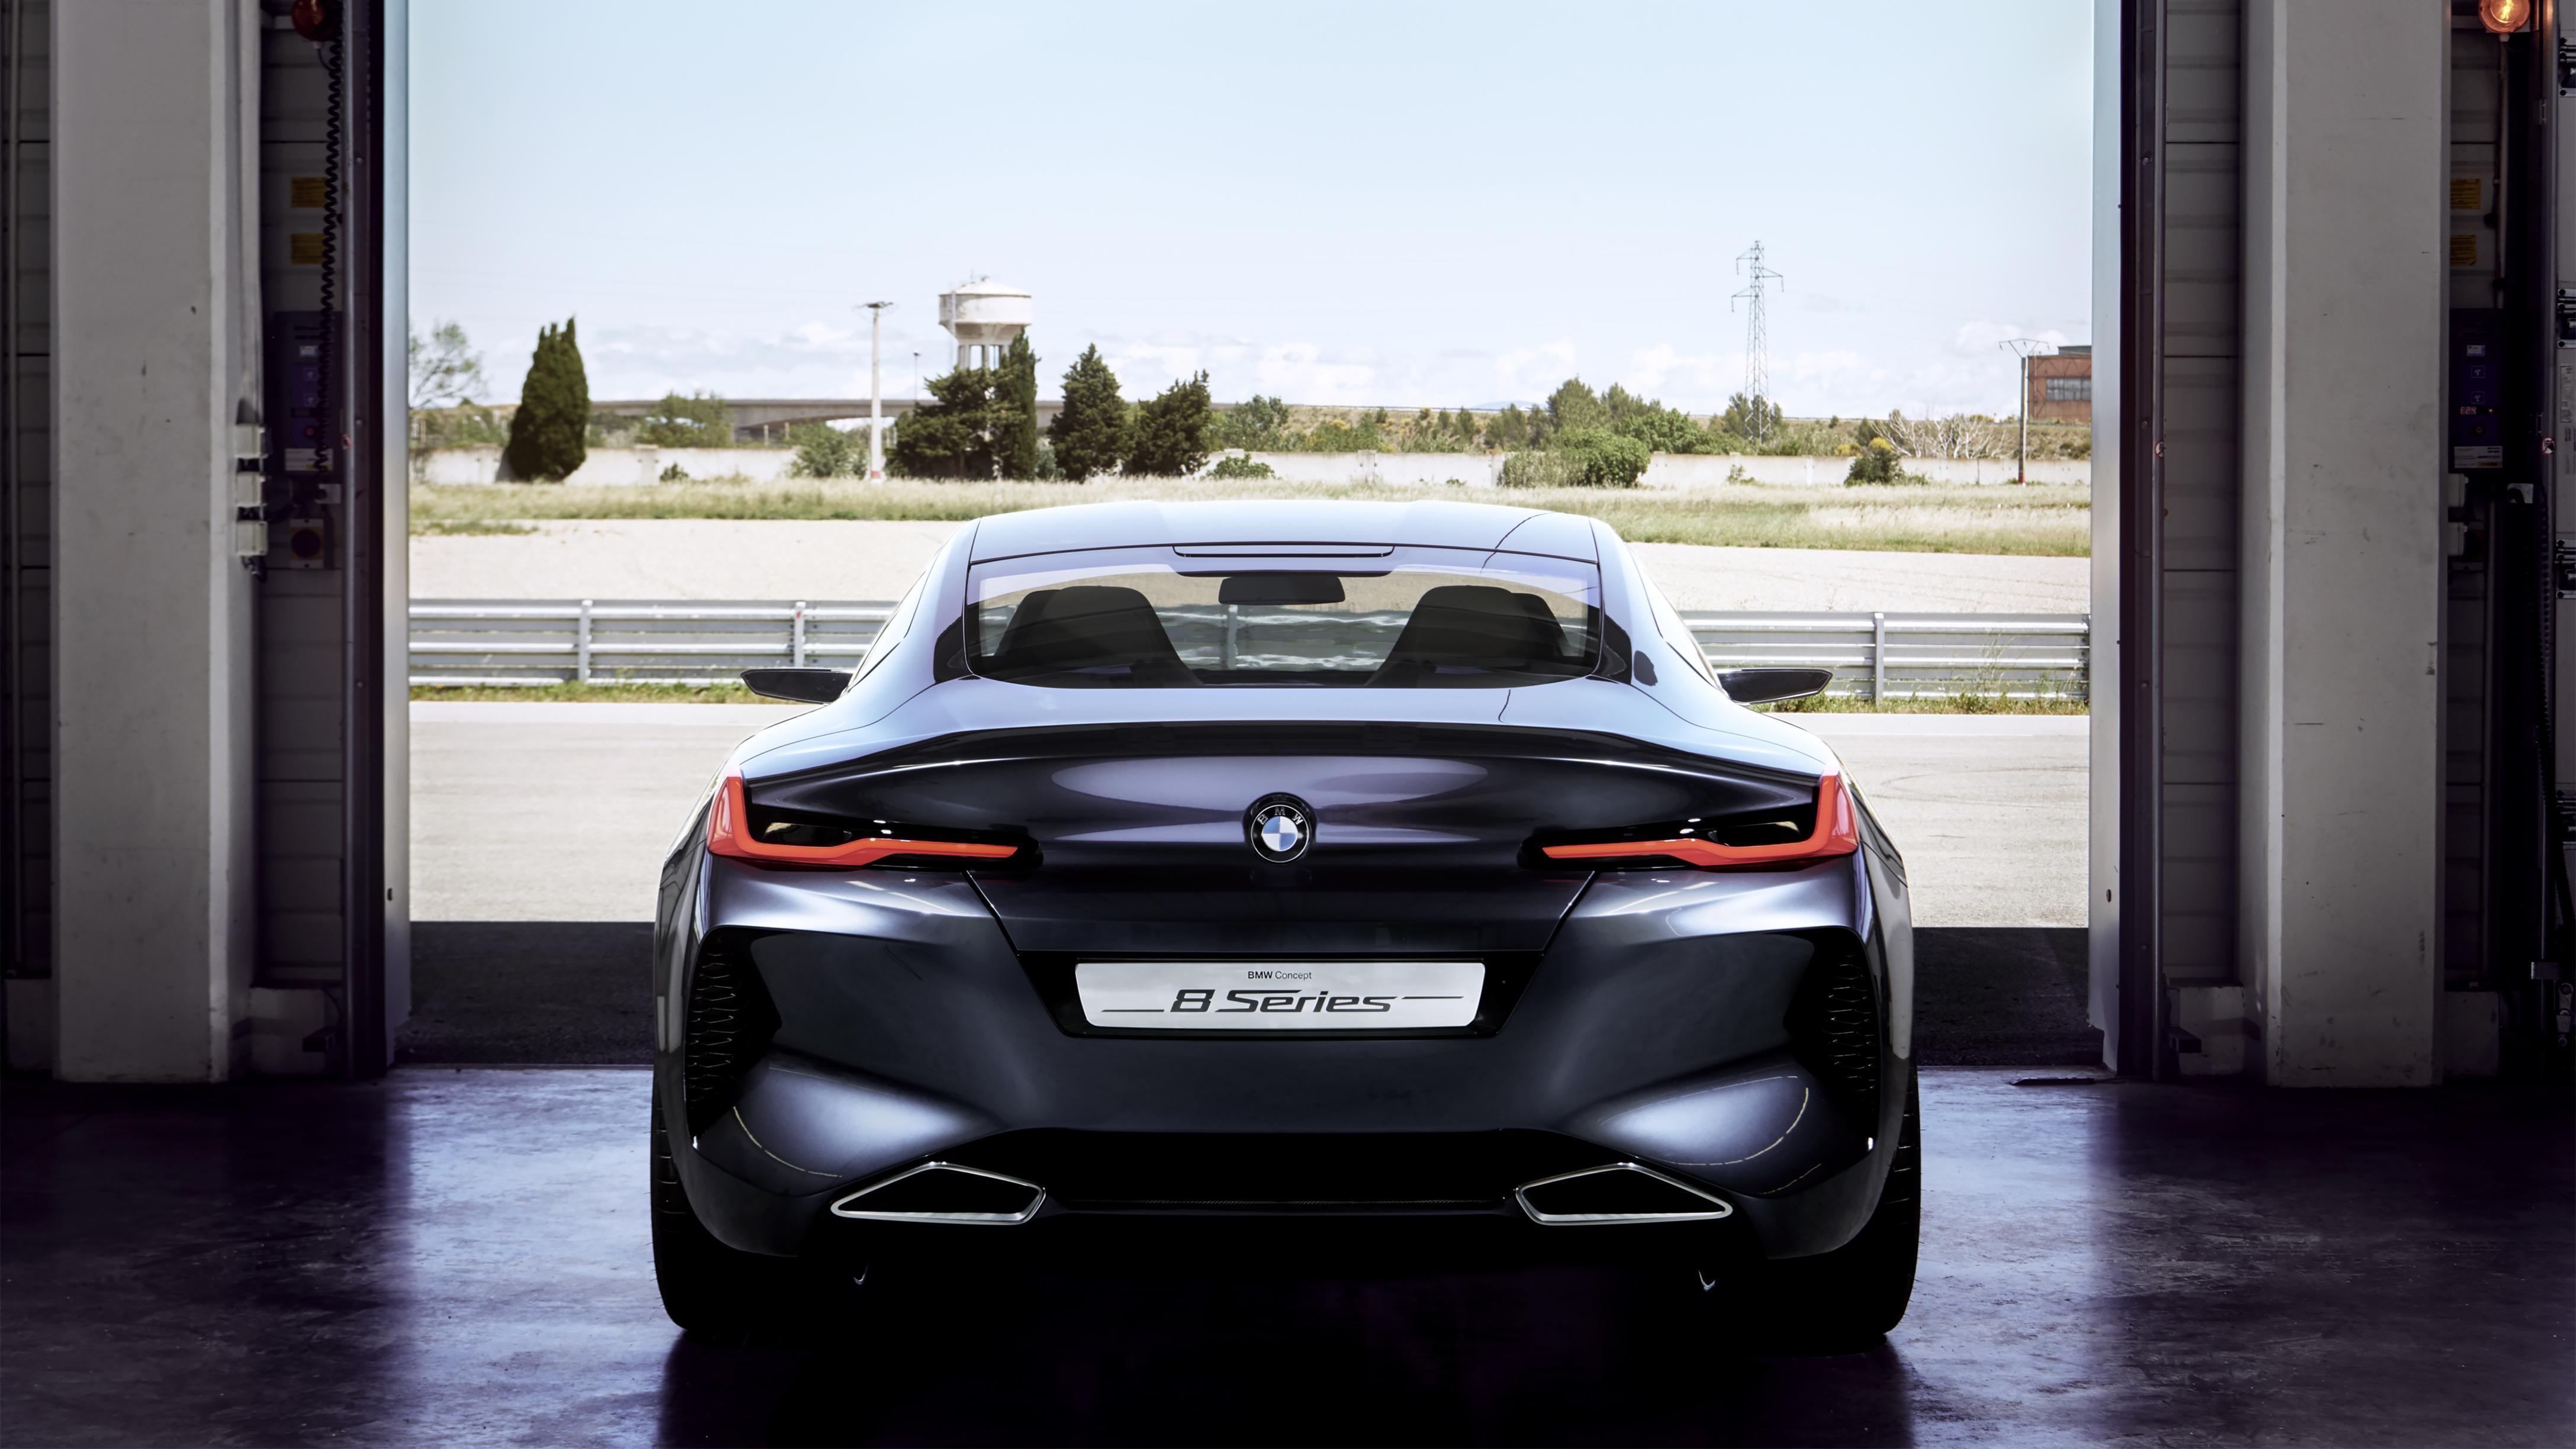 BMW Concept 8 Series 4k Ultra HD Wallpaper. Background Image